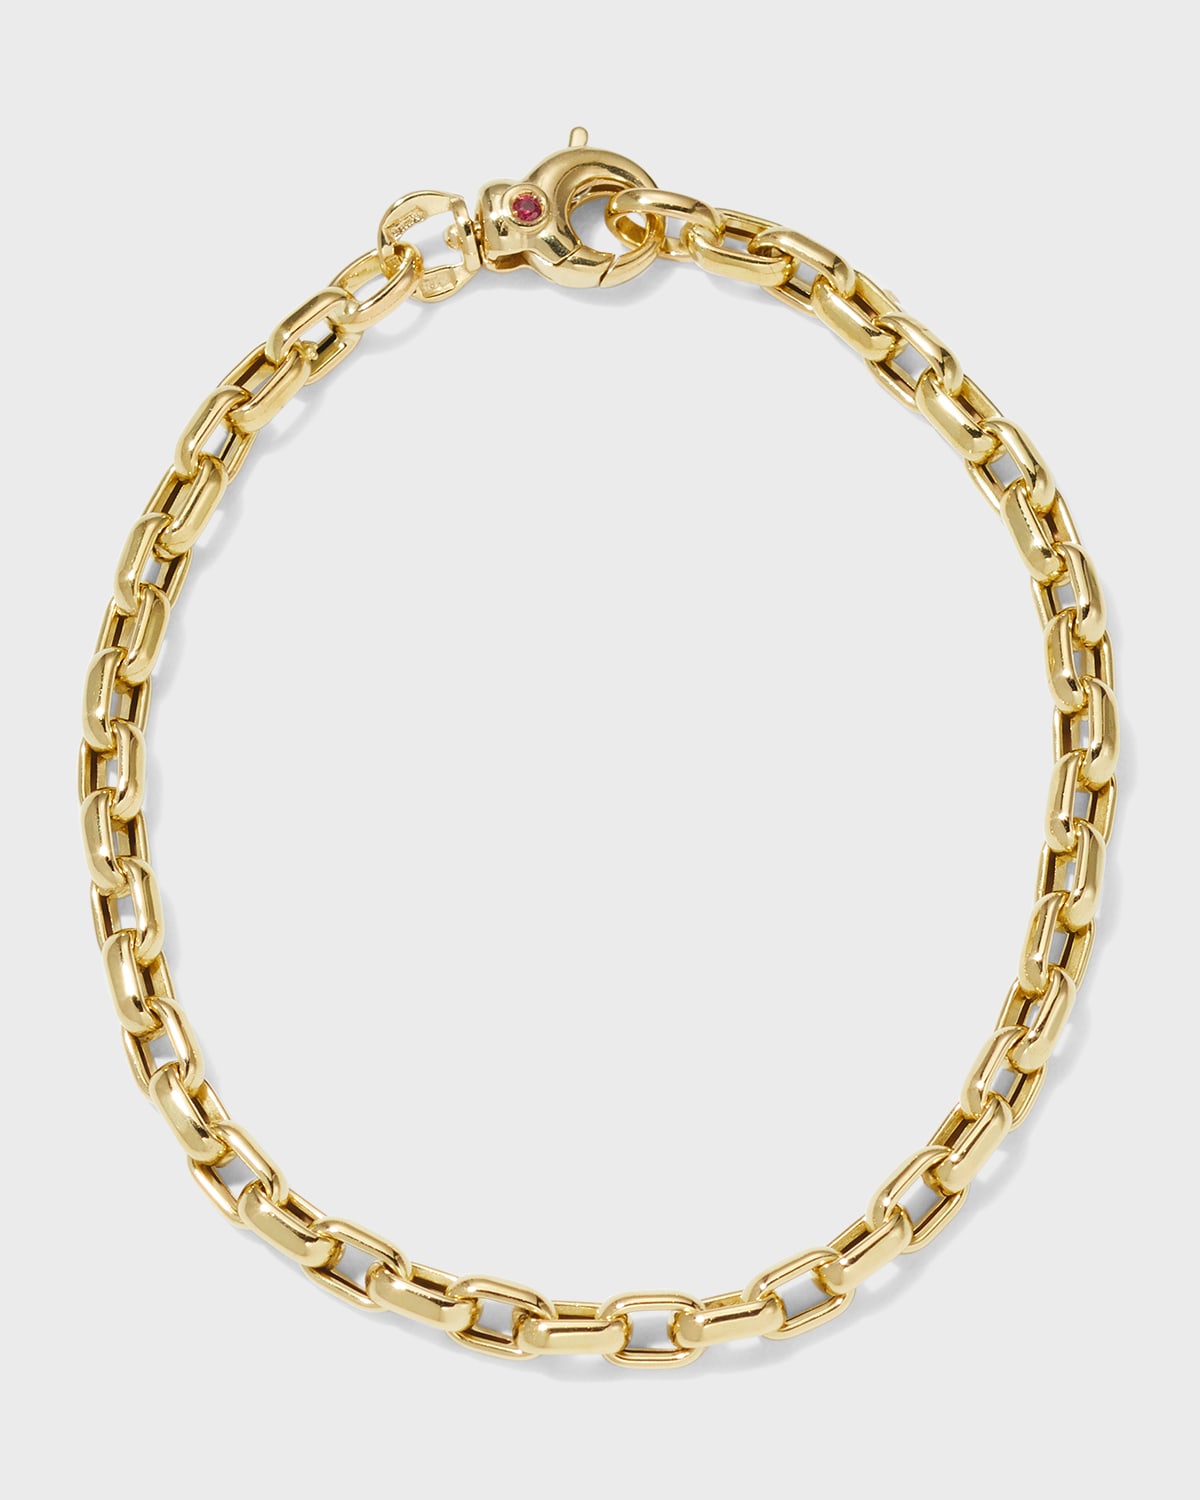 ROUND ROLO CHAIN MADE IN ITALY 18K YELLOW GOLD BRACELET 7.10 INCHES WITH HEART